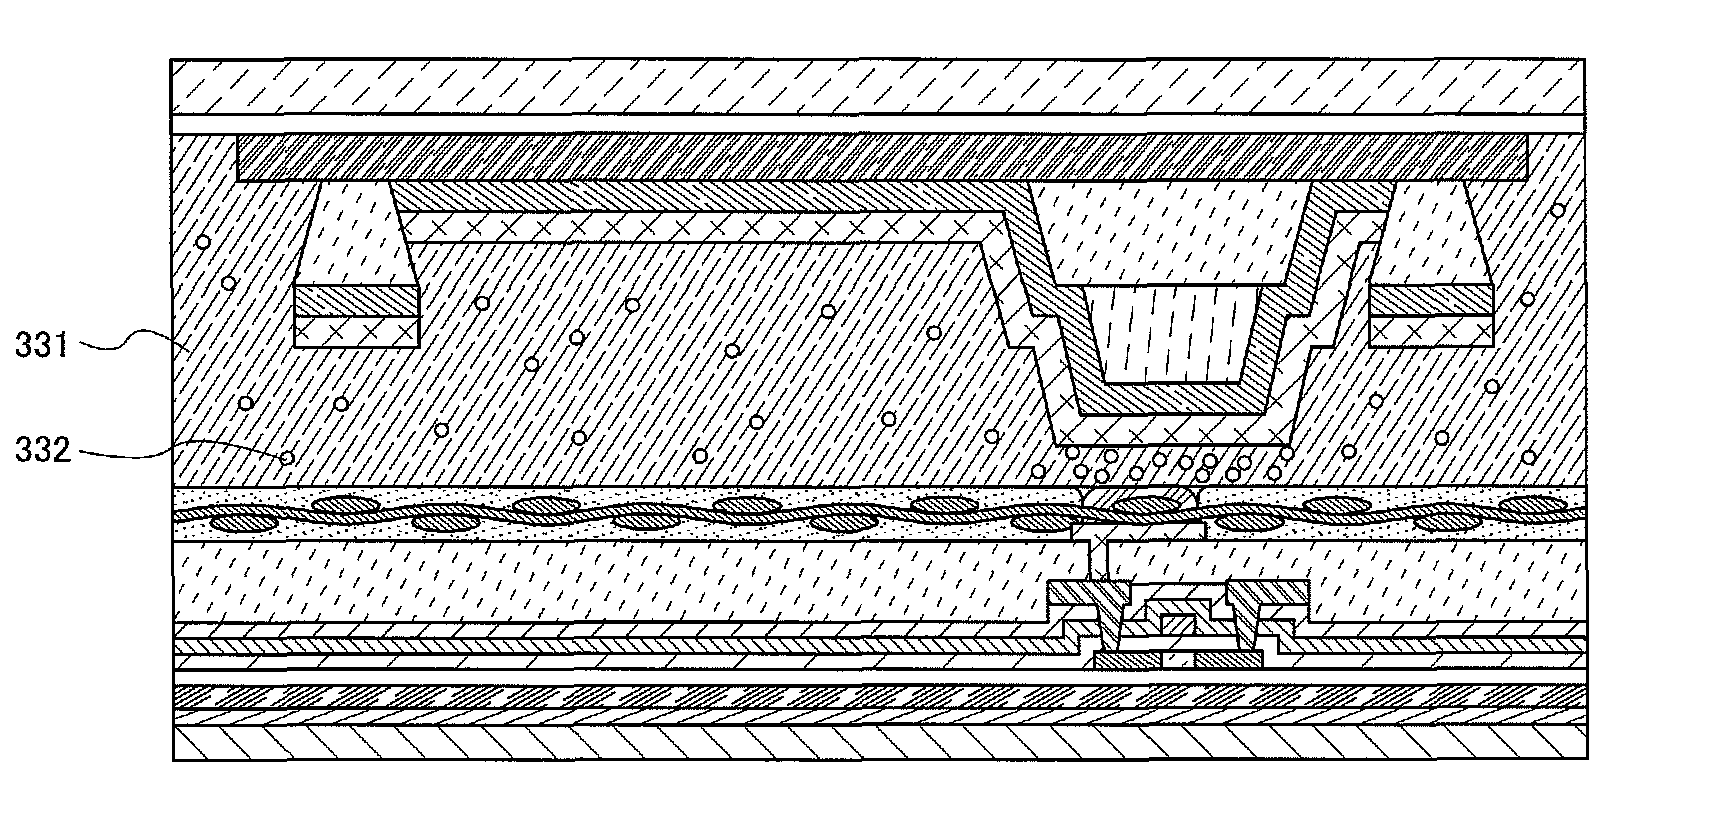 Light-emitting device, method for manufacturing the same, and cellular phone